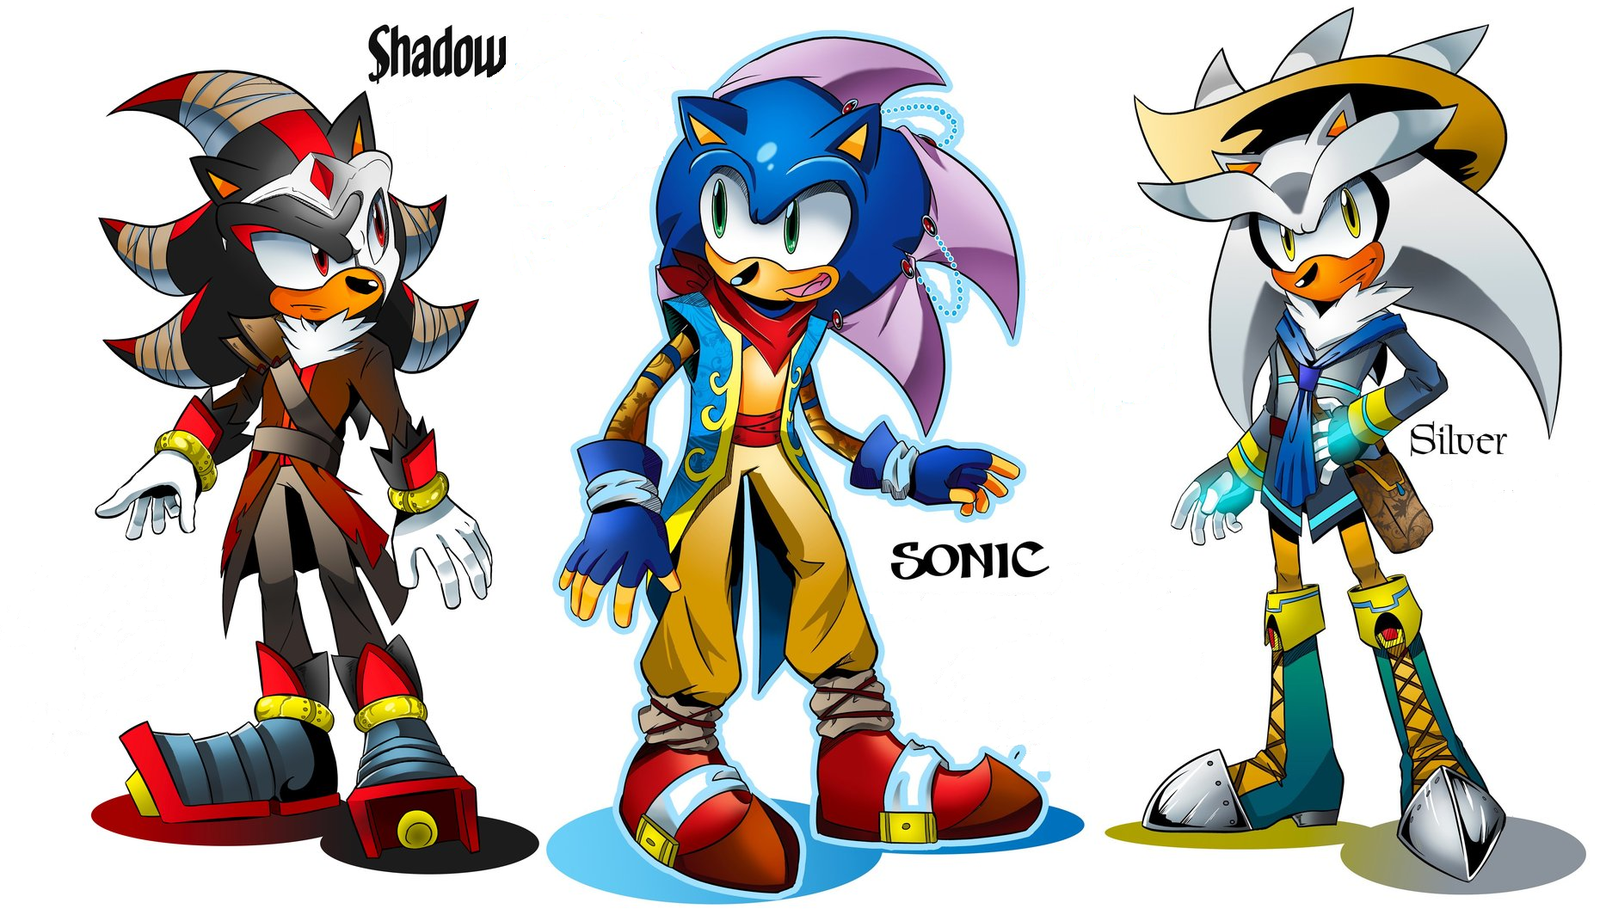 sonic  shadow  and silver by winxsonicfan12 d668072png 1600x915